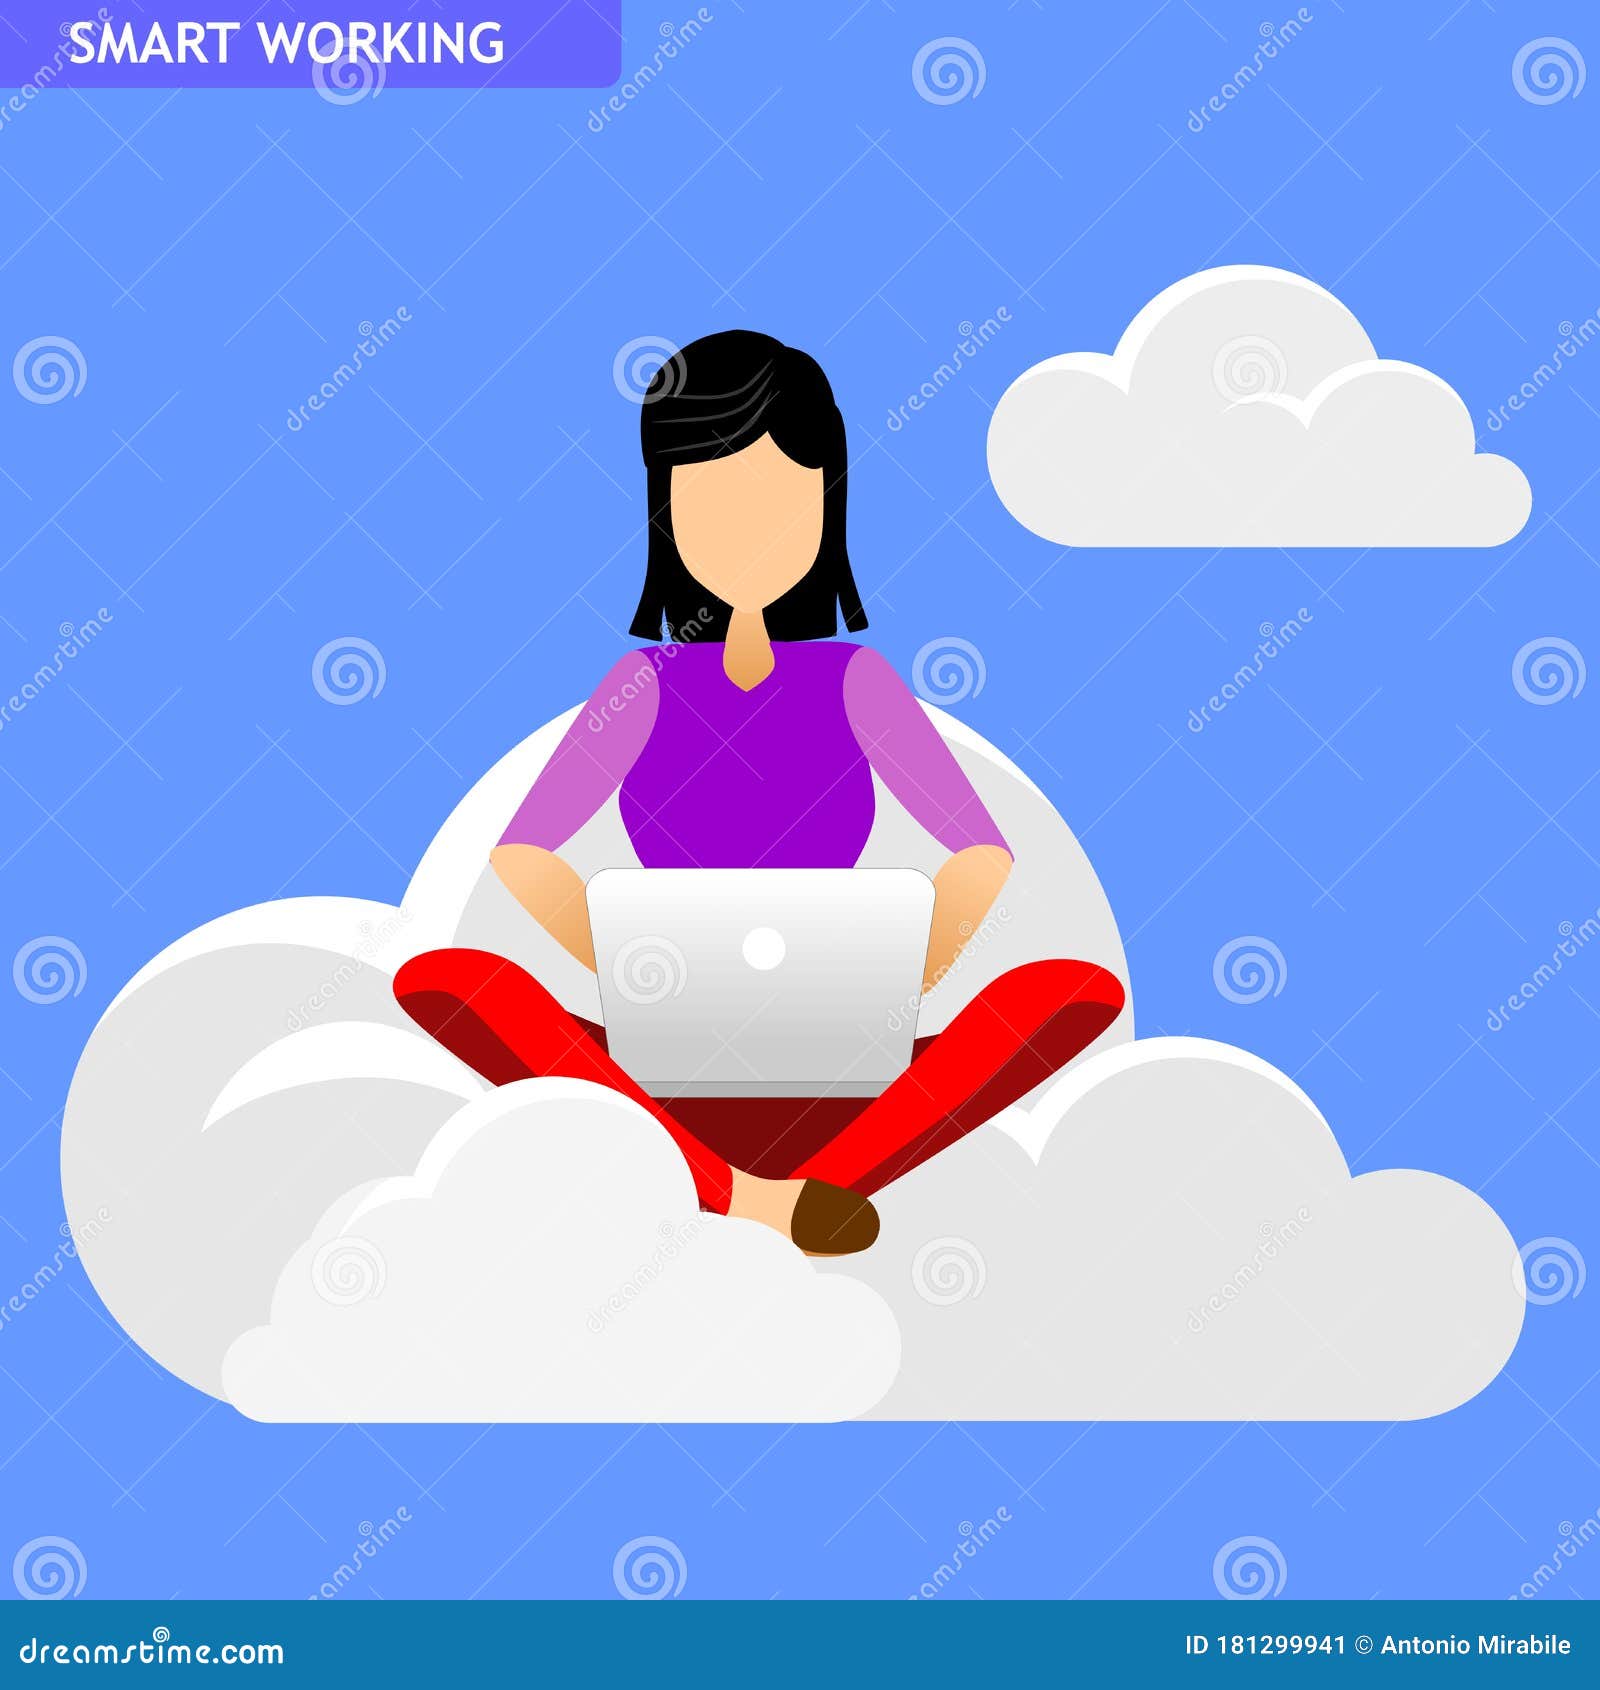 smart working. woman that work with laptop on cloud.